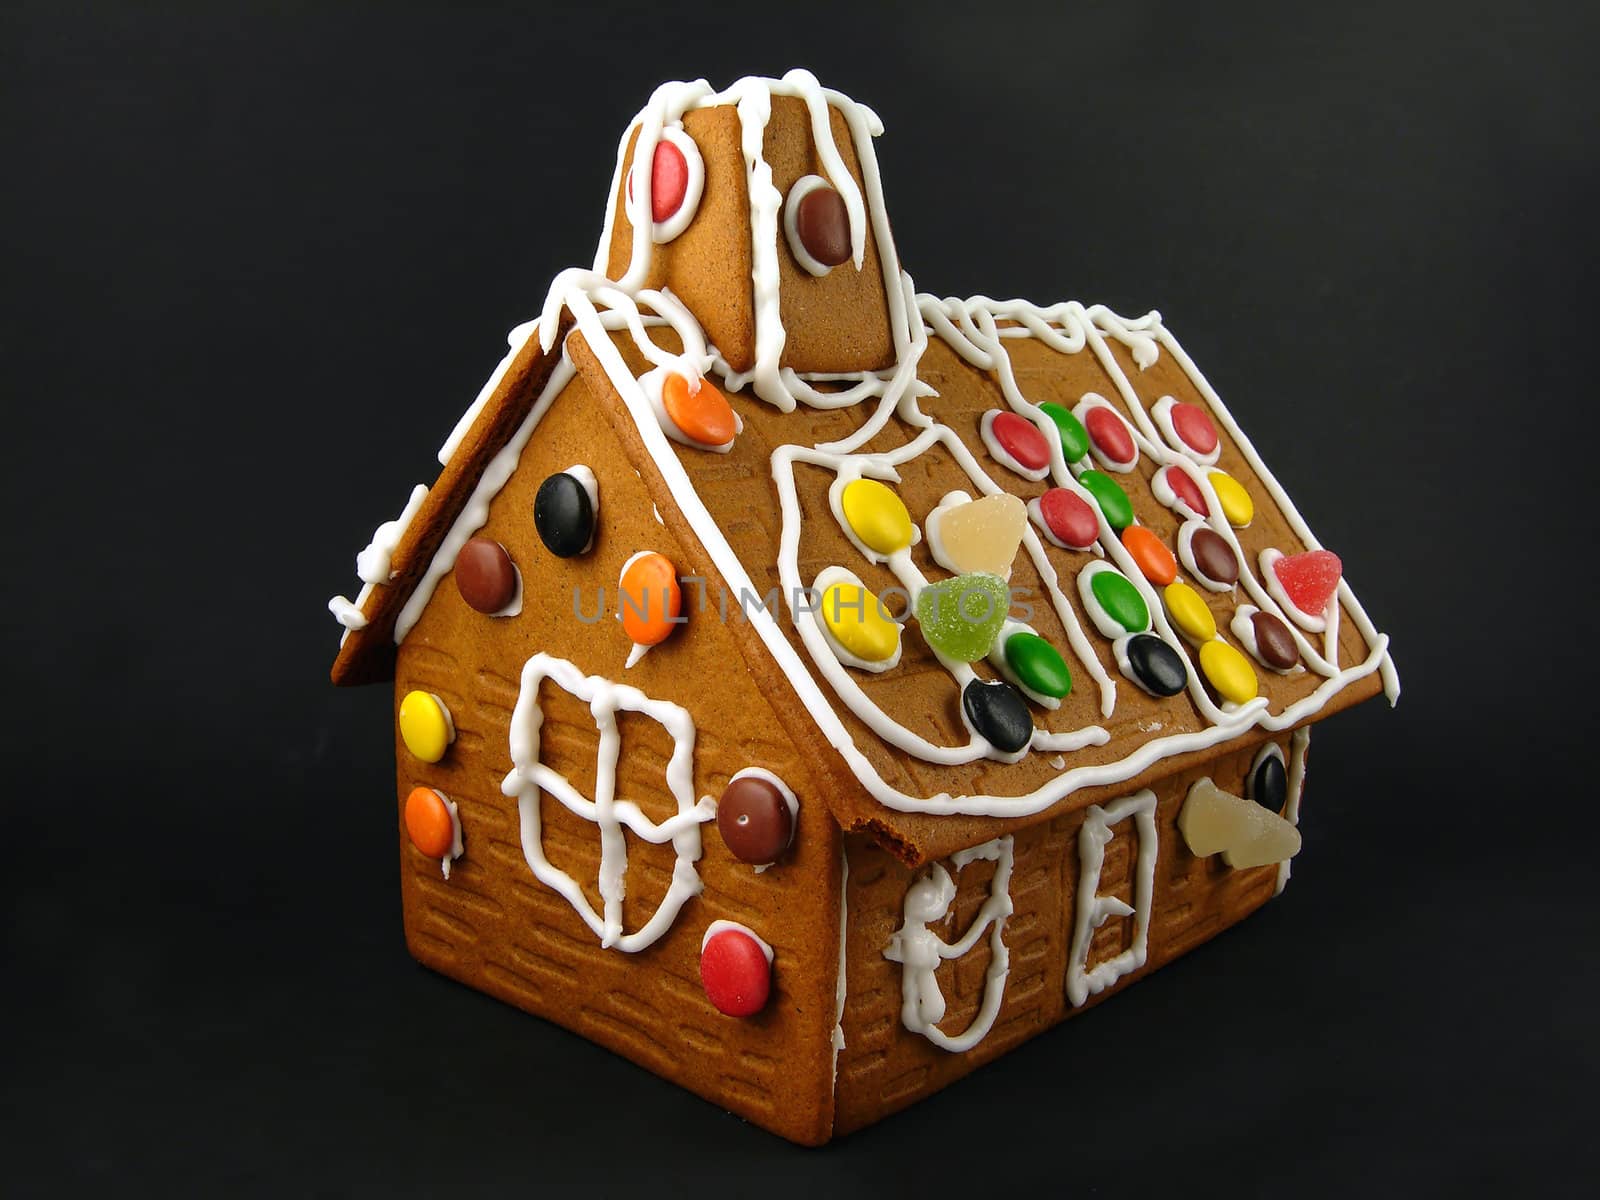 Norwegian Christmas. Decorated Gingerbread house